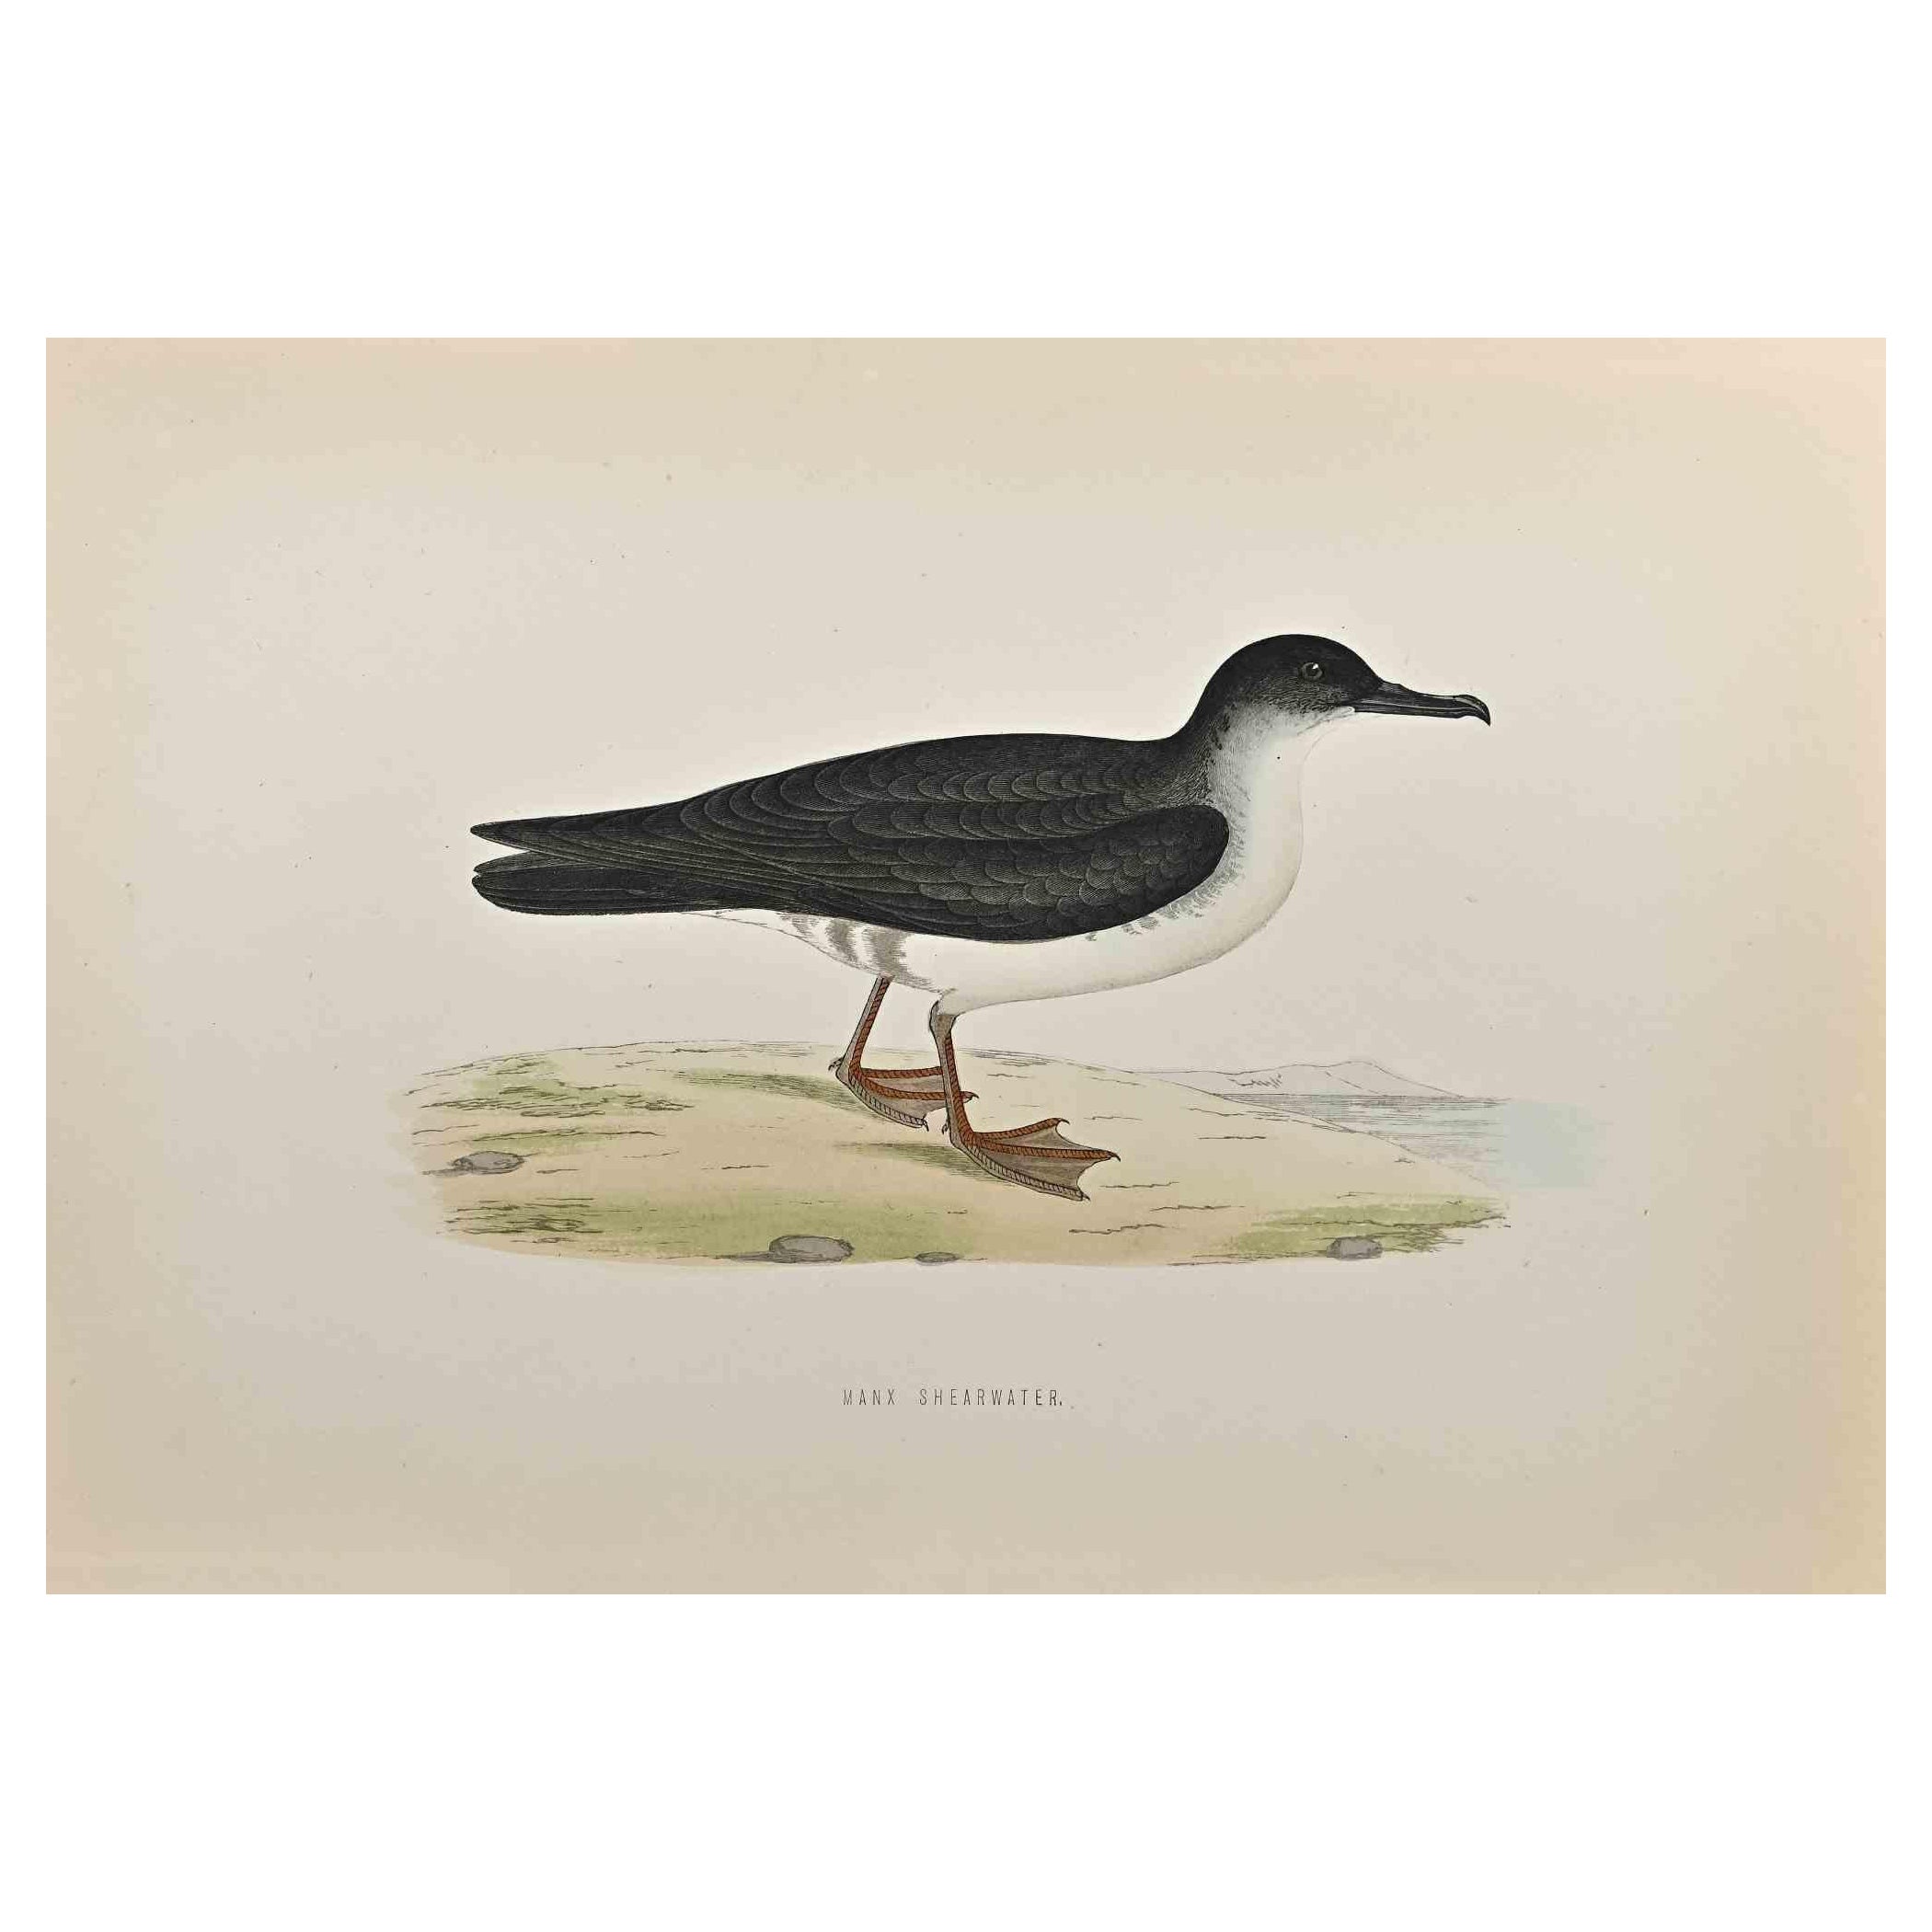 Manx Shearwater is a modern artwork realized in 1870 by the British artist Alexander Francis Lydon (1836-1917).

Woodcut print on ivory-colored paper.

Hand-colored, published by London, Bell & Sons, 1870.  

The name of the bird is printed on the